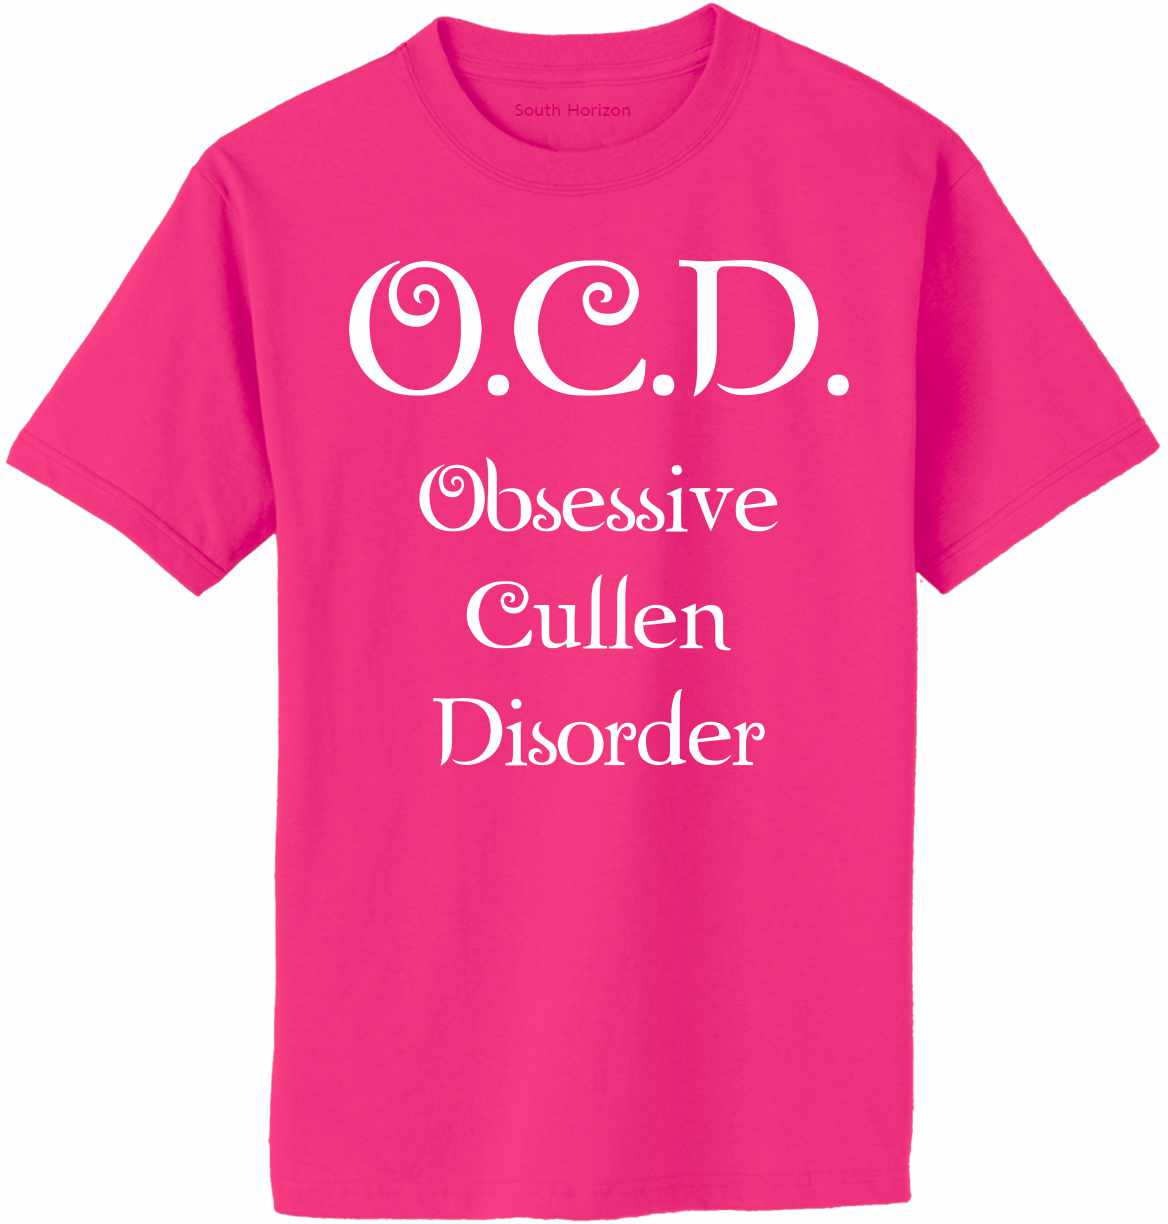 OBSESSIVE CULLEN DISORDER on Adult T-Shirt